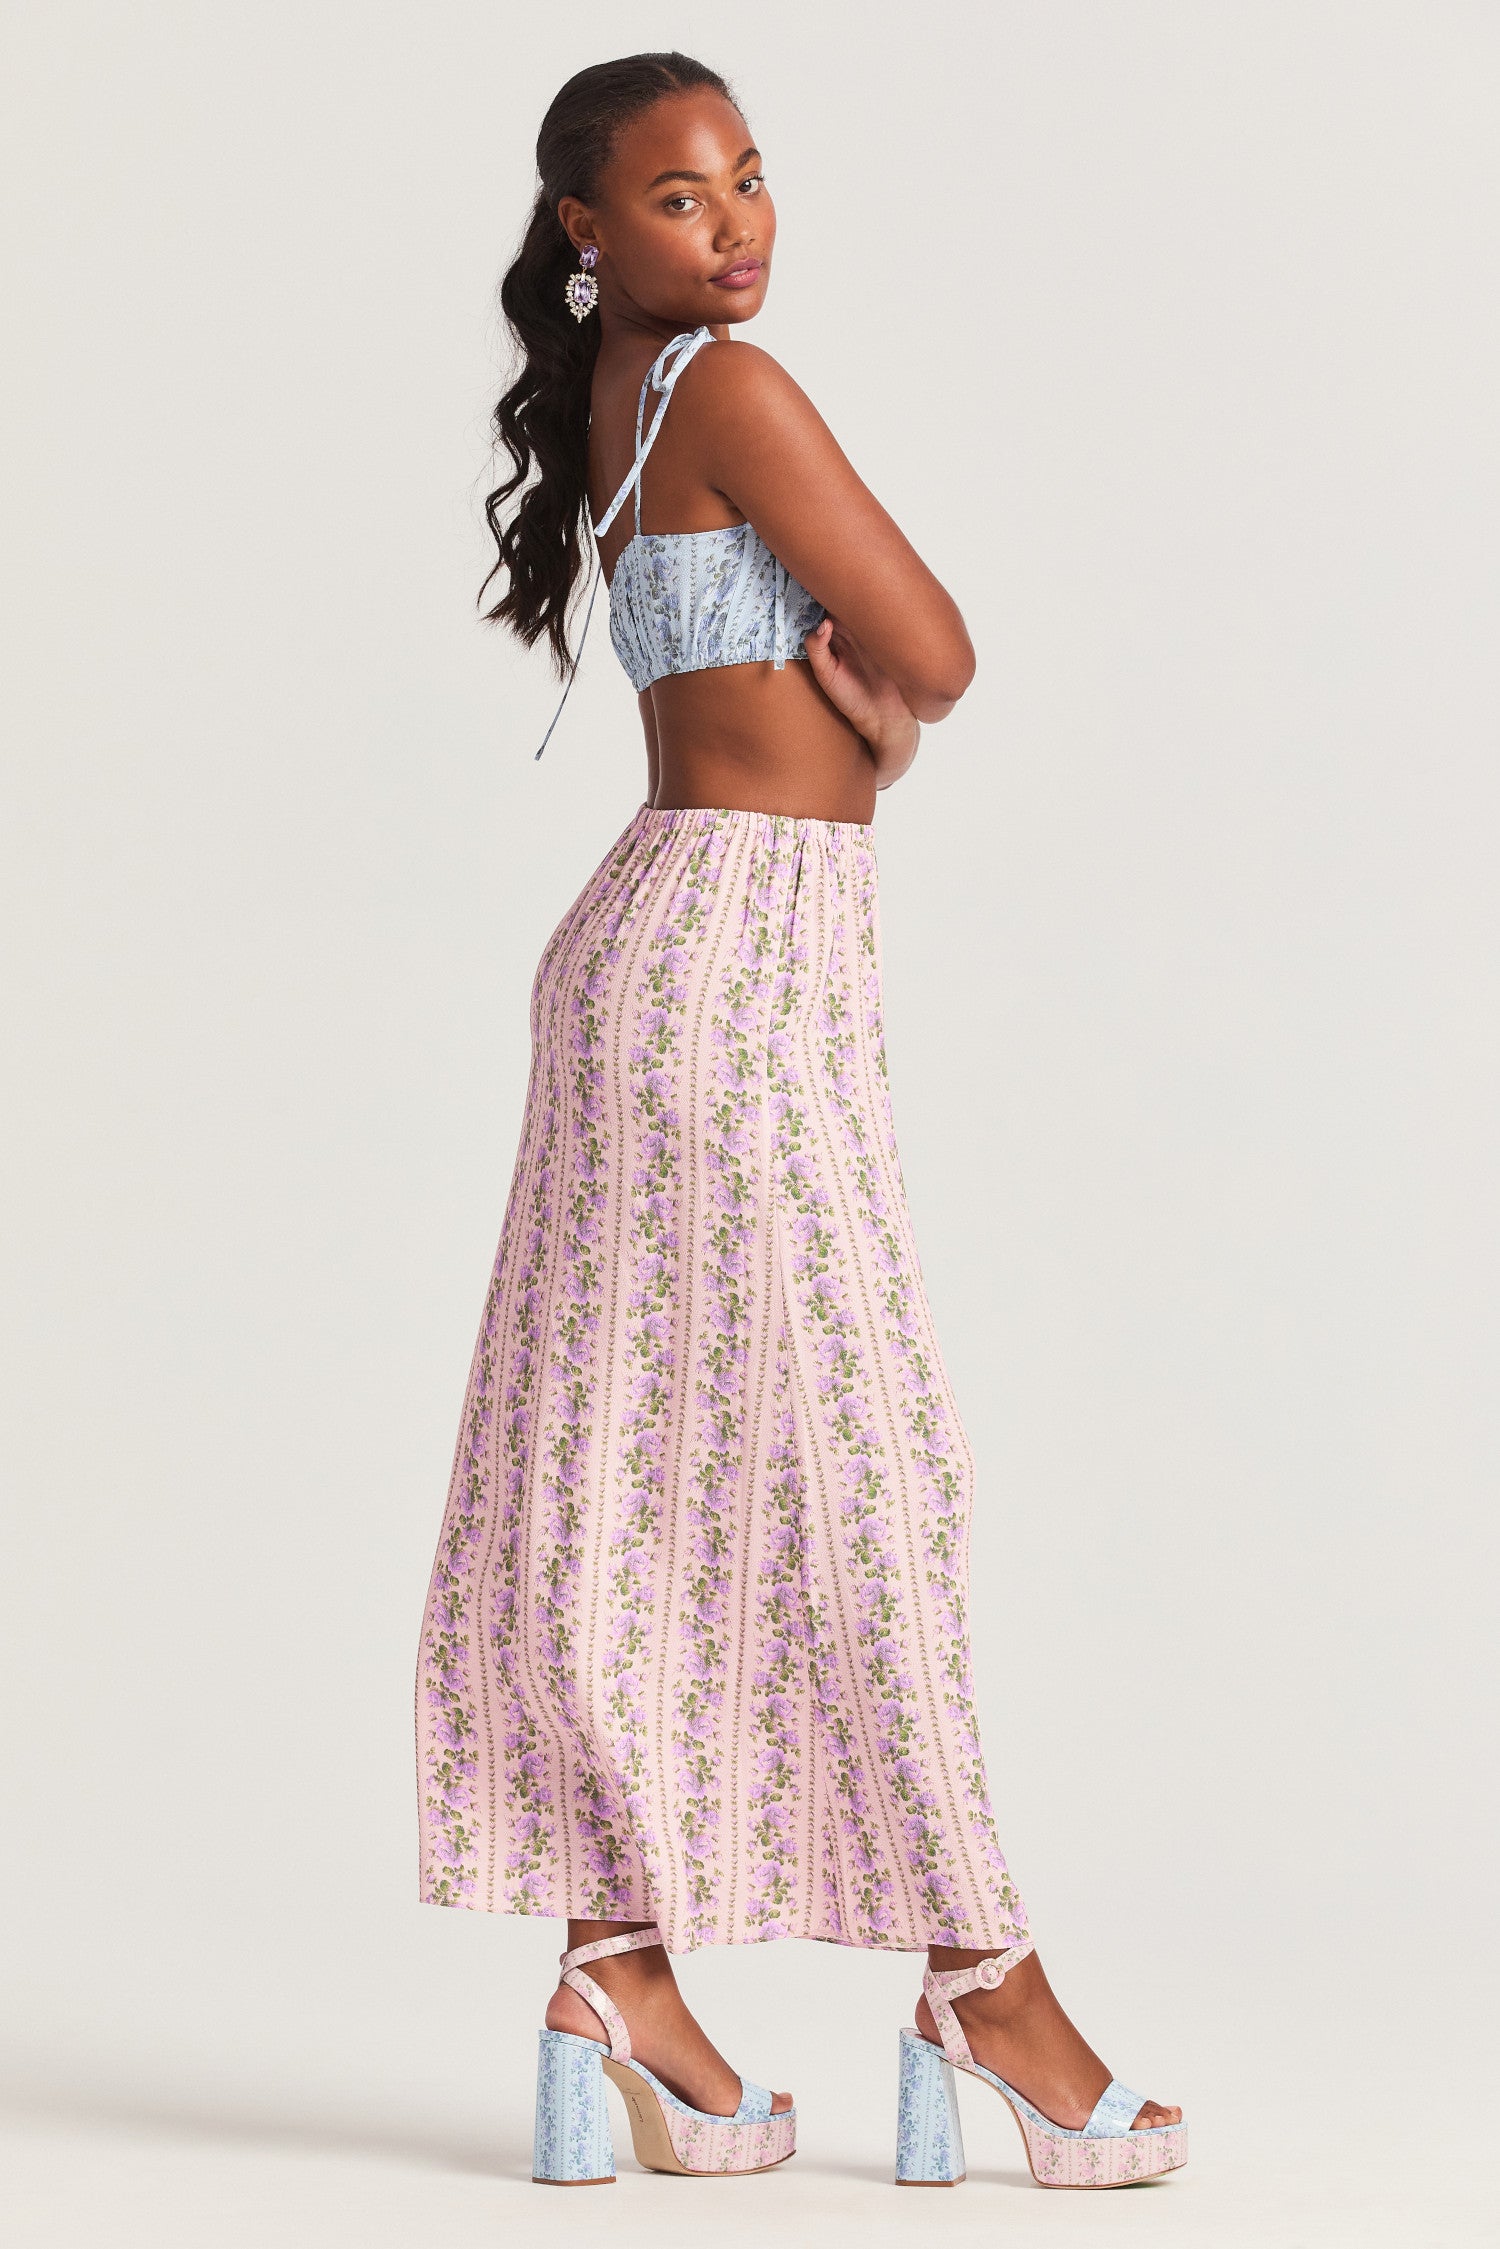 Floral pink midi skirt with crepe fabric. Slim fit with encased elastic at the waist. 